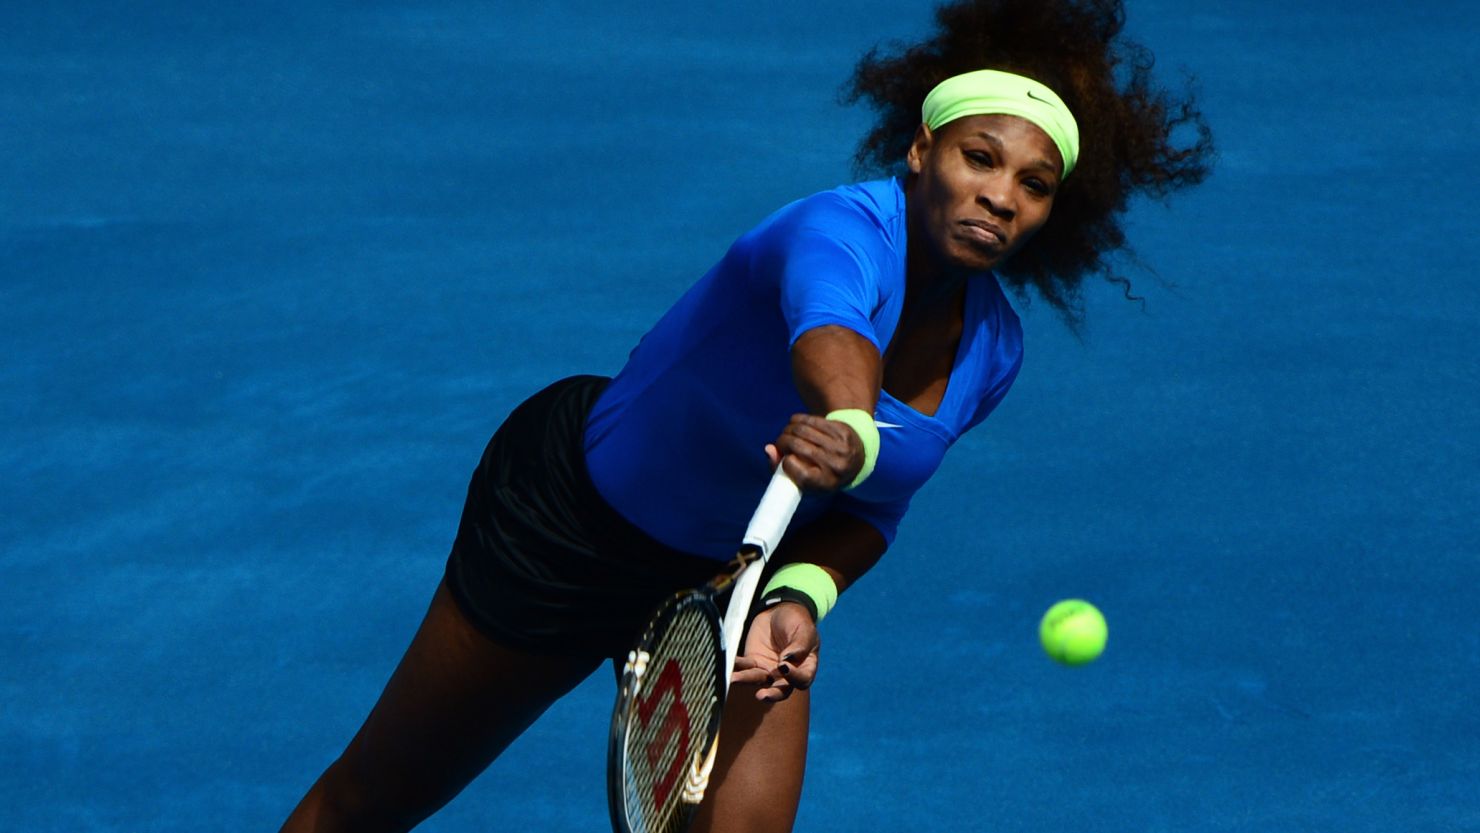 Serena Williams breezed into the second round of the Madrid Masters with a straight sets victory over Elena Vesnina